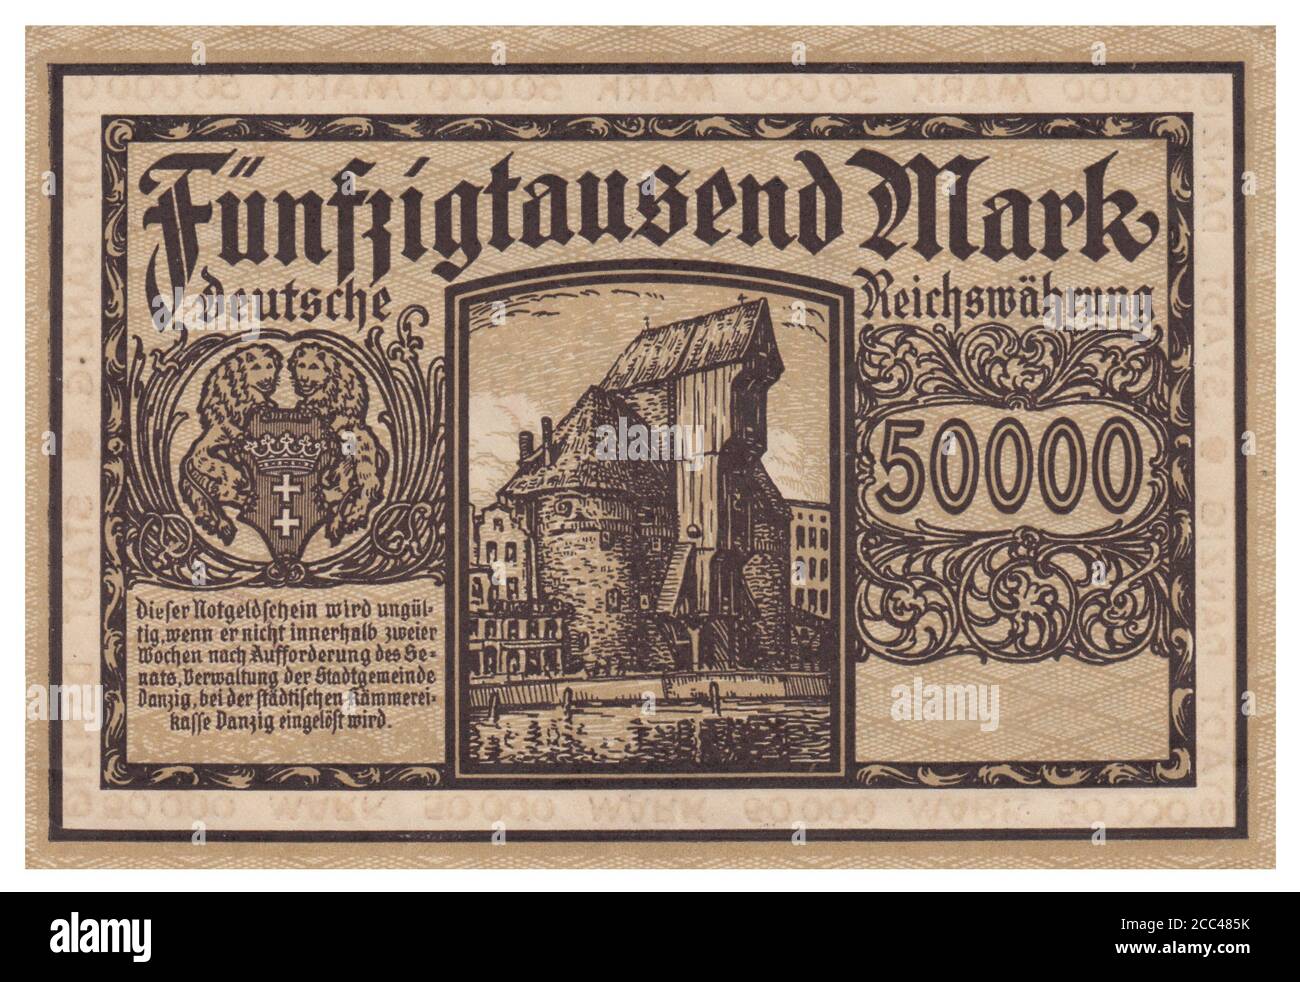 Emergency money (notgeld) banknote of Danzig (town). 50000 mark (DM). On background could see; Long bridge with Krahntor.  October 1922 The Free City Stock Photo